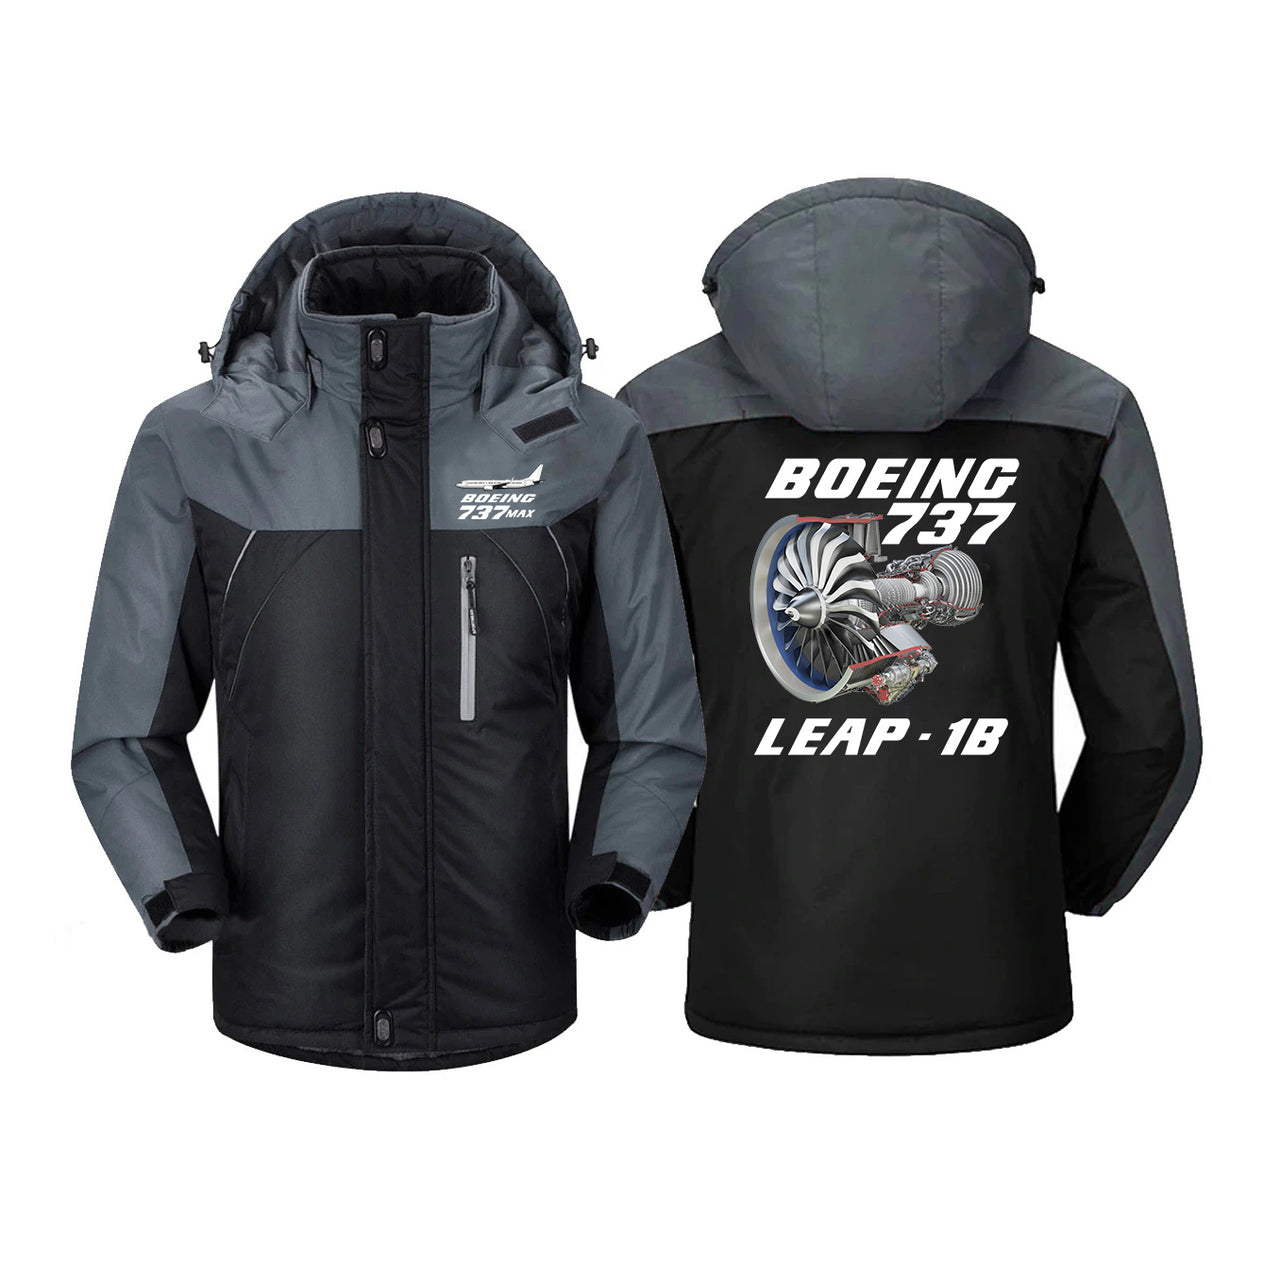 Boeing 737 & Leap 1B Designed Thick Winter Jackets